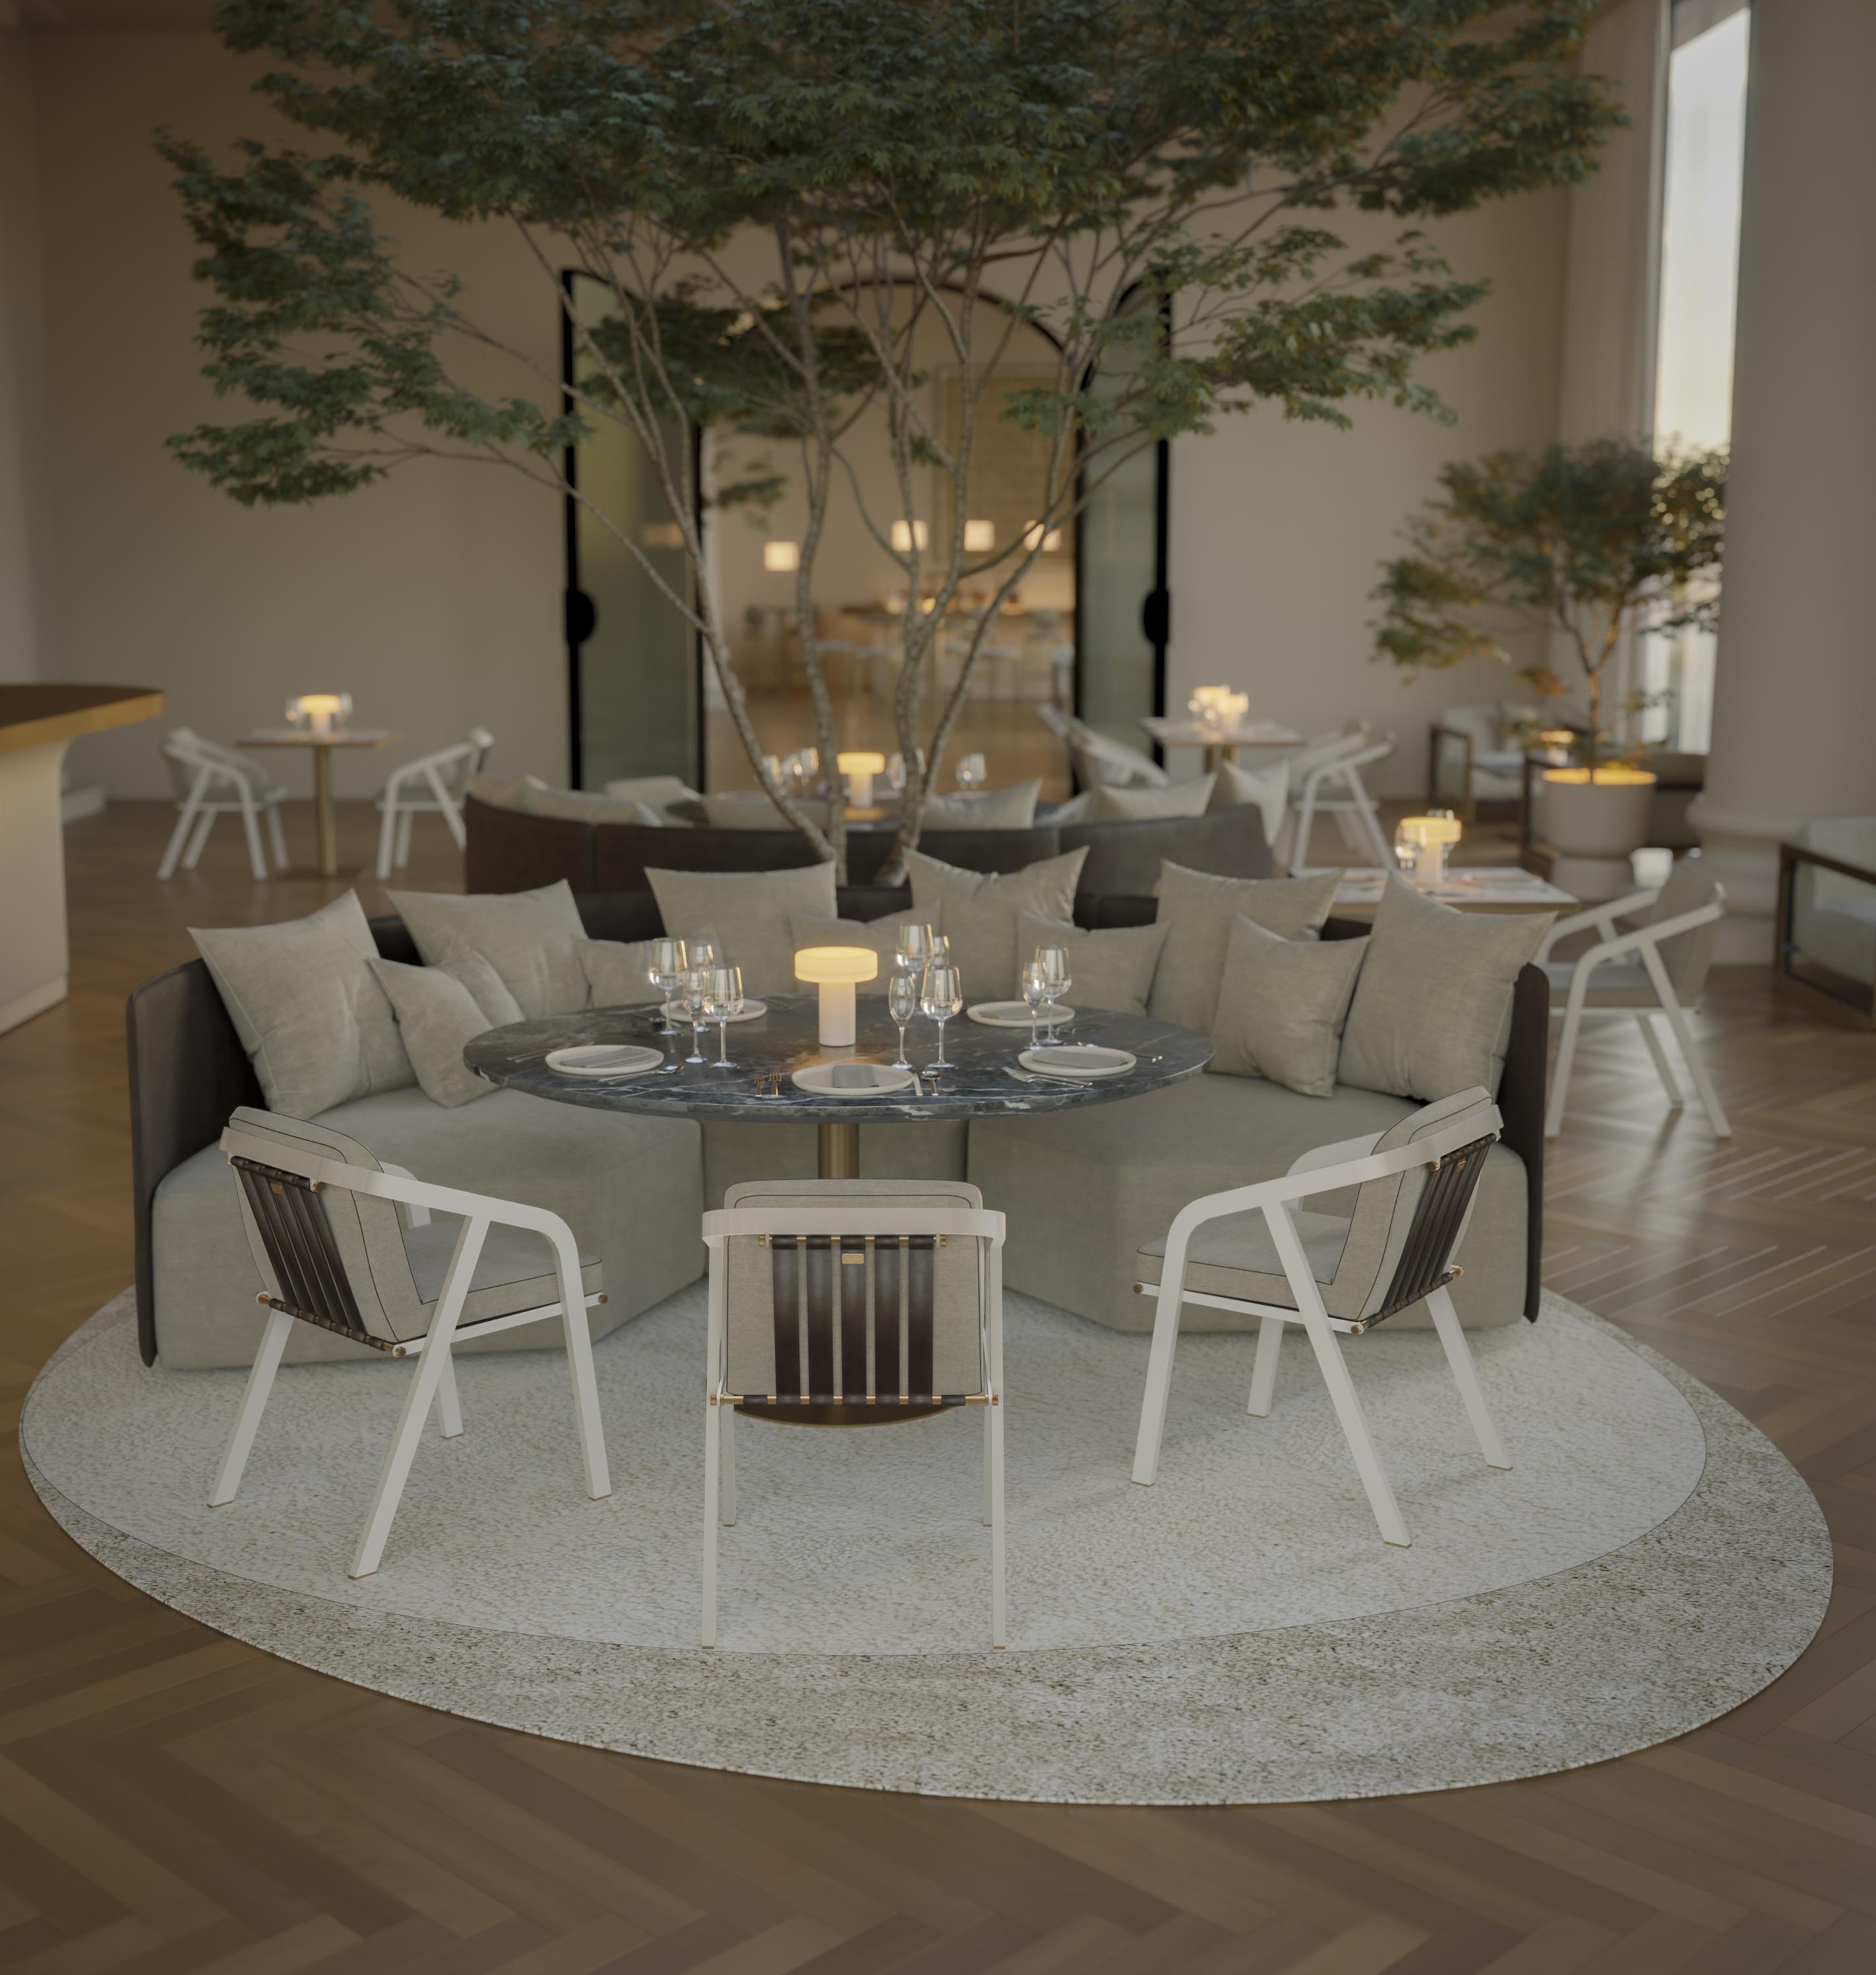 The Dawn round dining table proves to be an attractive option as it features a modern design, perfect for adding a touch of contemporary elegance to your decor.

Its composition features high quality materials, including a marble top and a plated